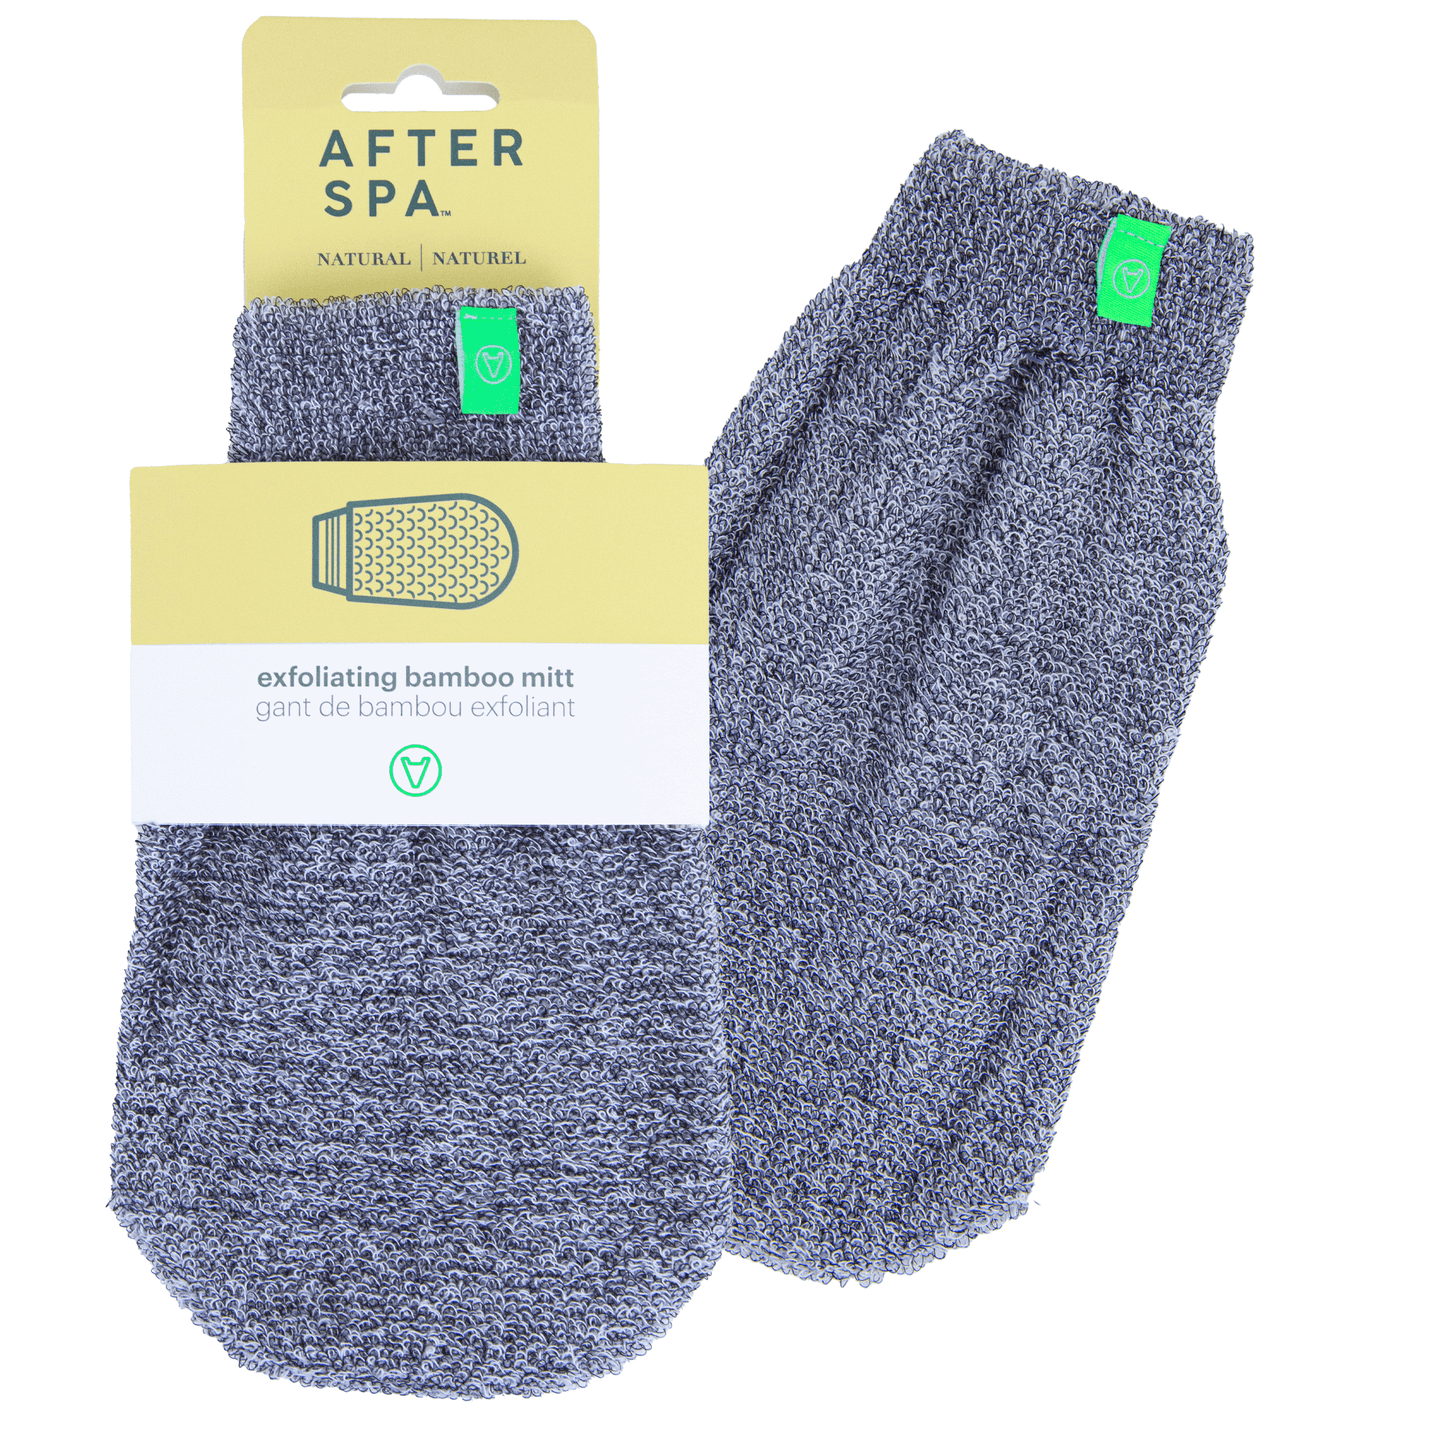 Afterspa Exfoliating Bamboo Mitt | to exfoliate the body.